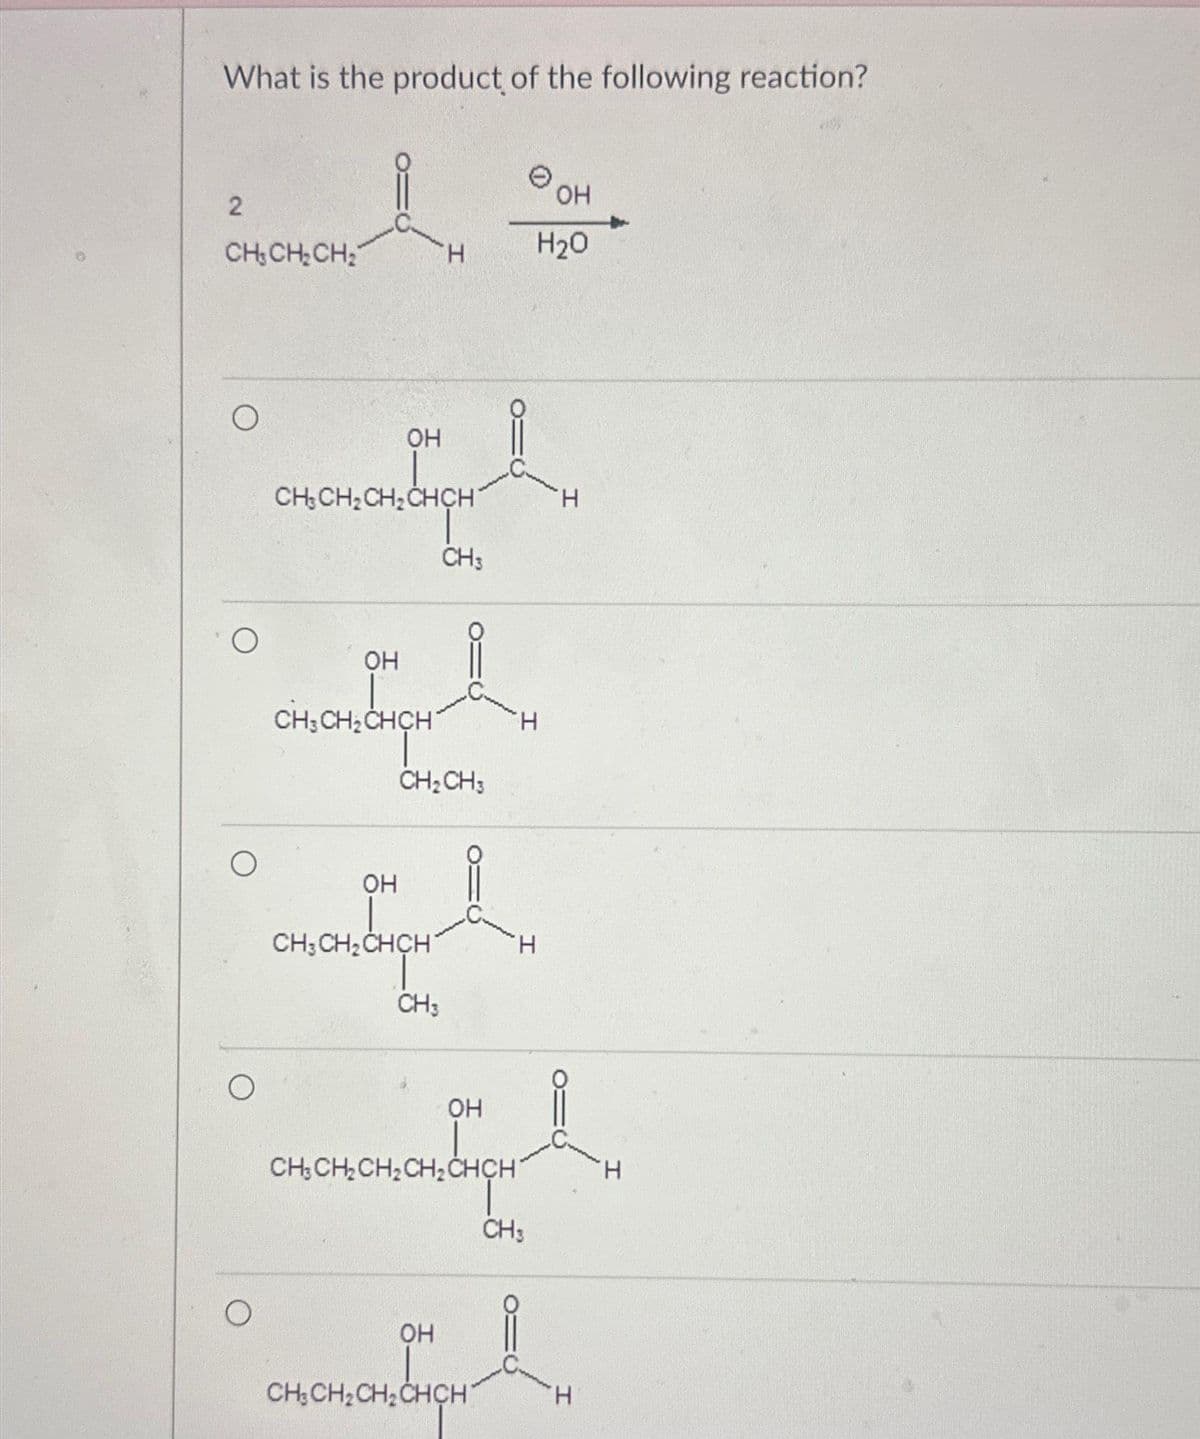 What is the product of the following reaction?
2
CH₂CH₂CH₂
O
! .
OH
H₂O
OH
CH₂ CH₂ CH₂ CHCH
OH
CH3CH₂CHCH
12 CHCH
CH3
CH₂CH3
OH
CH3 CH₂ CHCH
vertigin
CH3
OH
OH
CHỊCH, CHỊCHÍCHCH
CH3CH₂CH₂CHCH
H
H
CH3
H
www.w
H
H